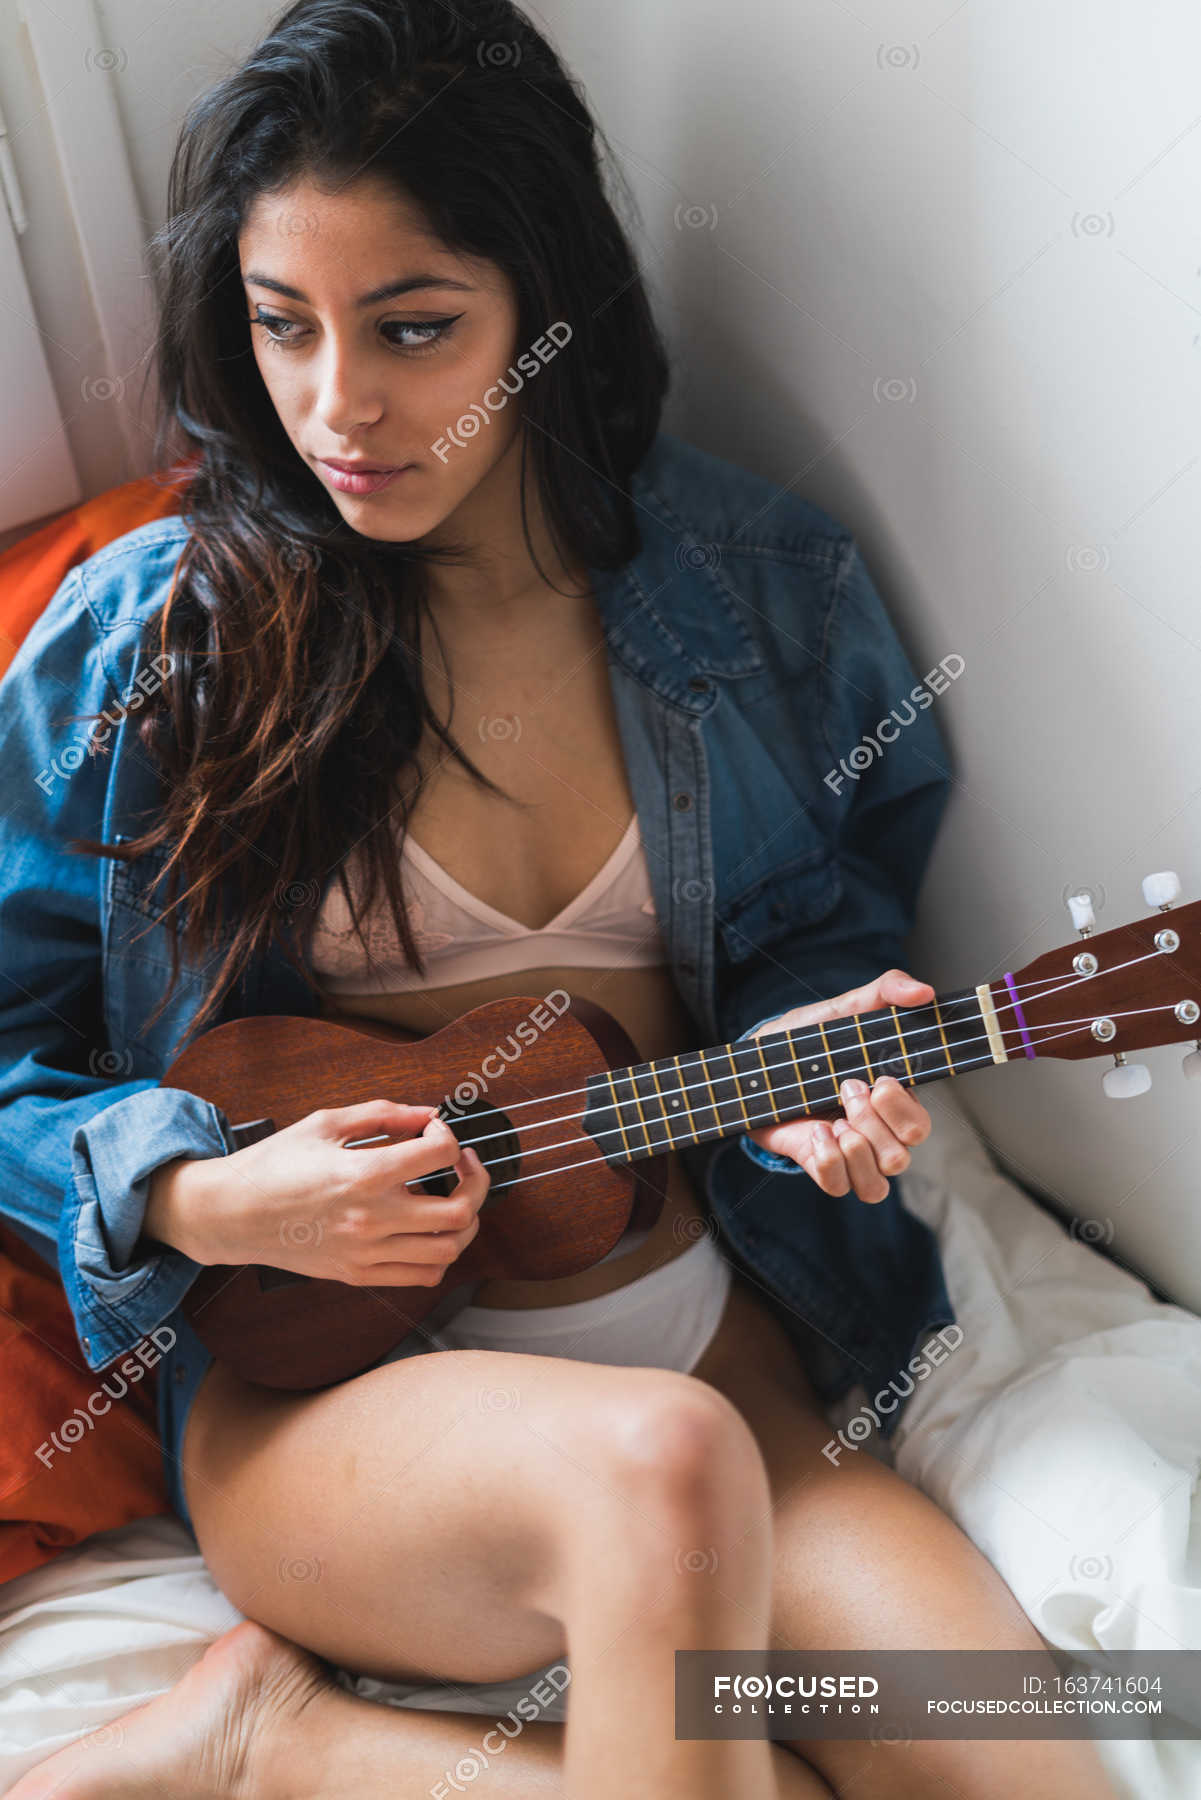 Female playing the — acoustic, person Stock Photo | #163741604